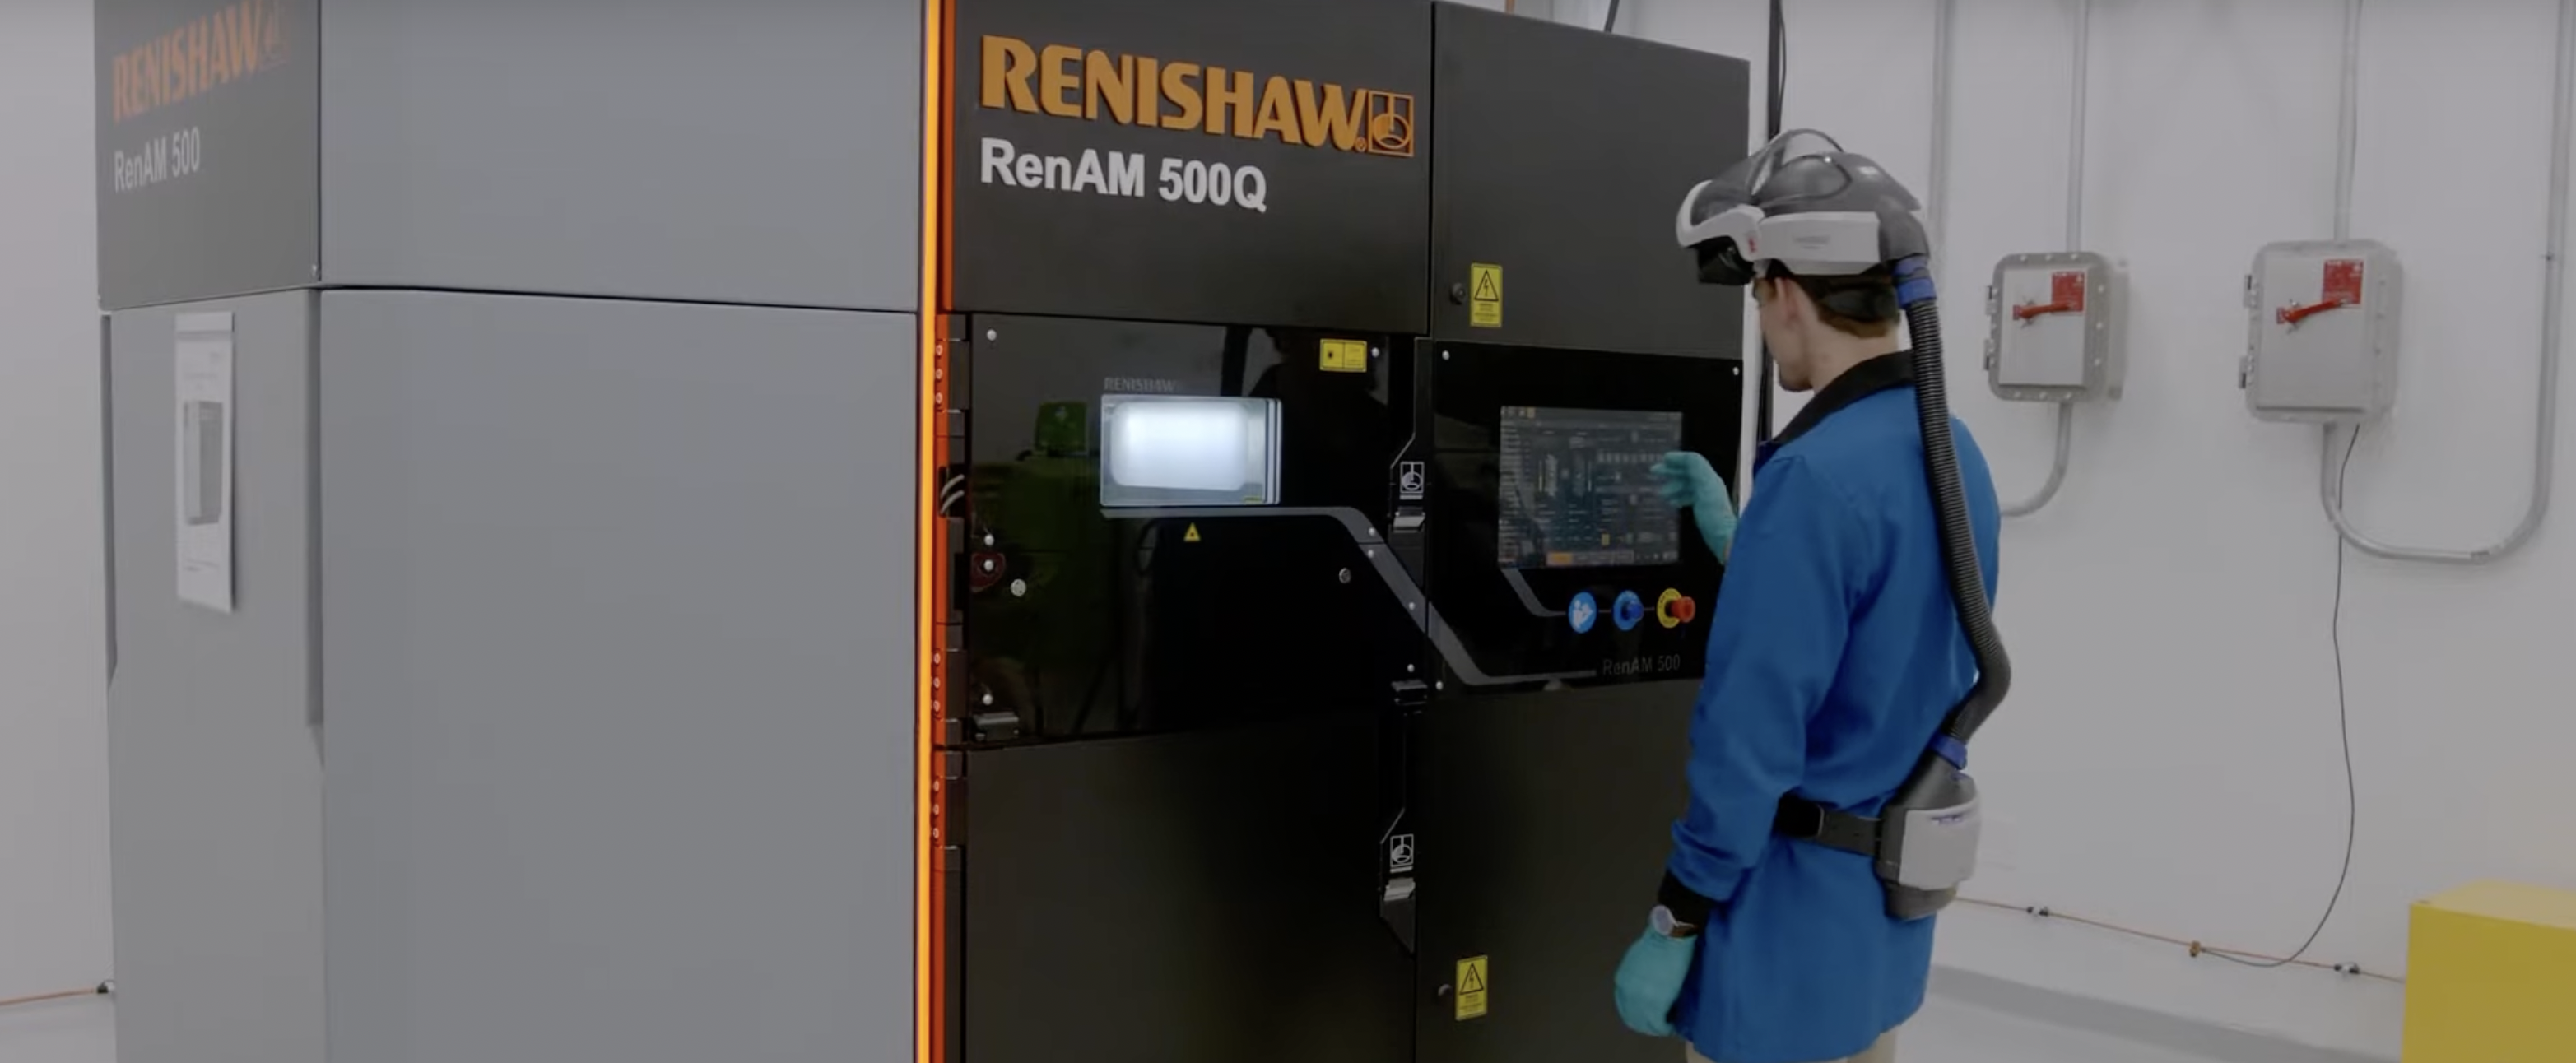 An engineer at one of Collins Aerospace facilities using a Renishaw 3D printer.